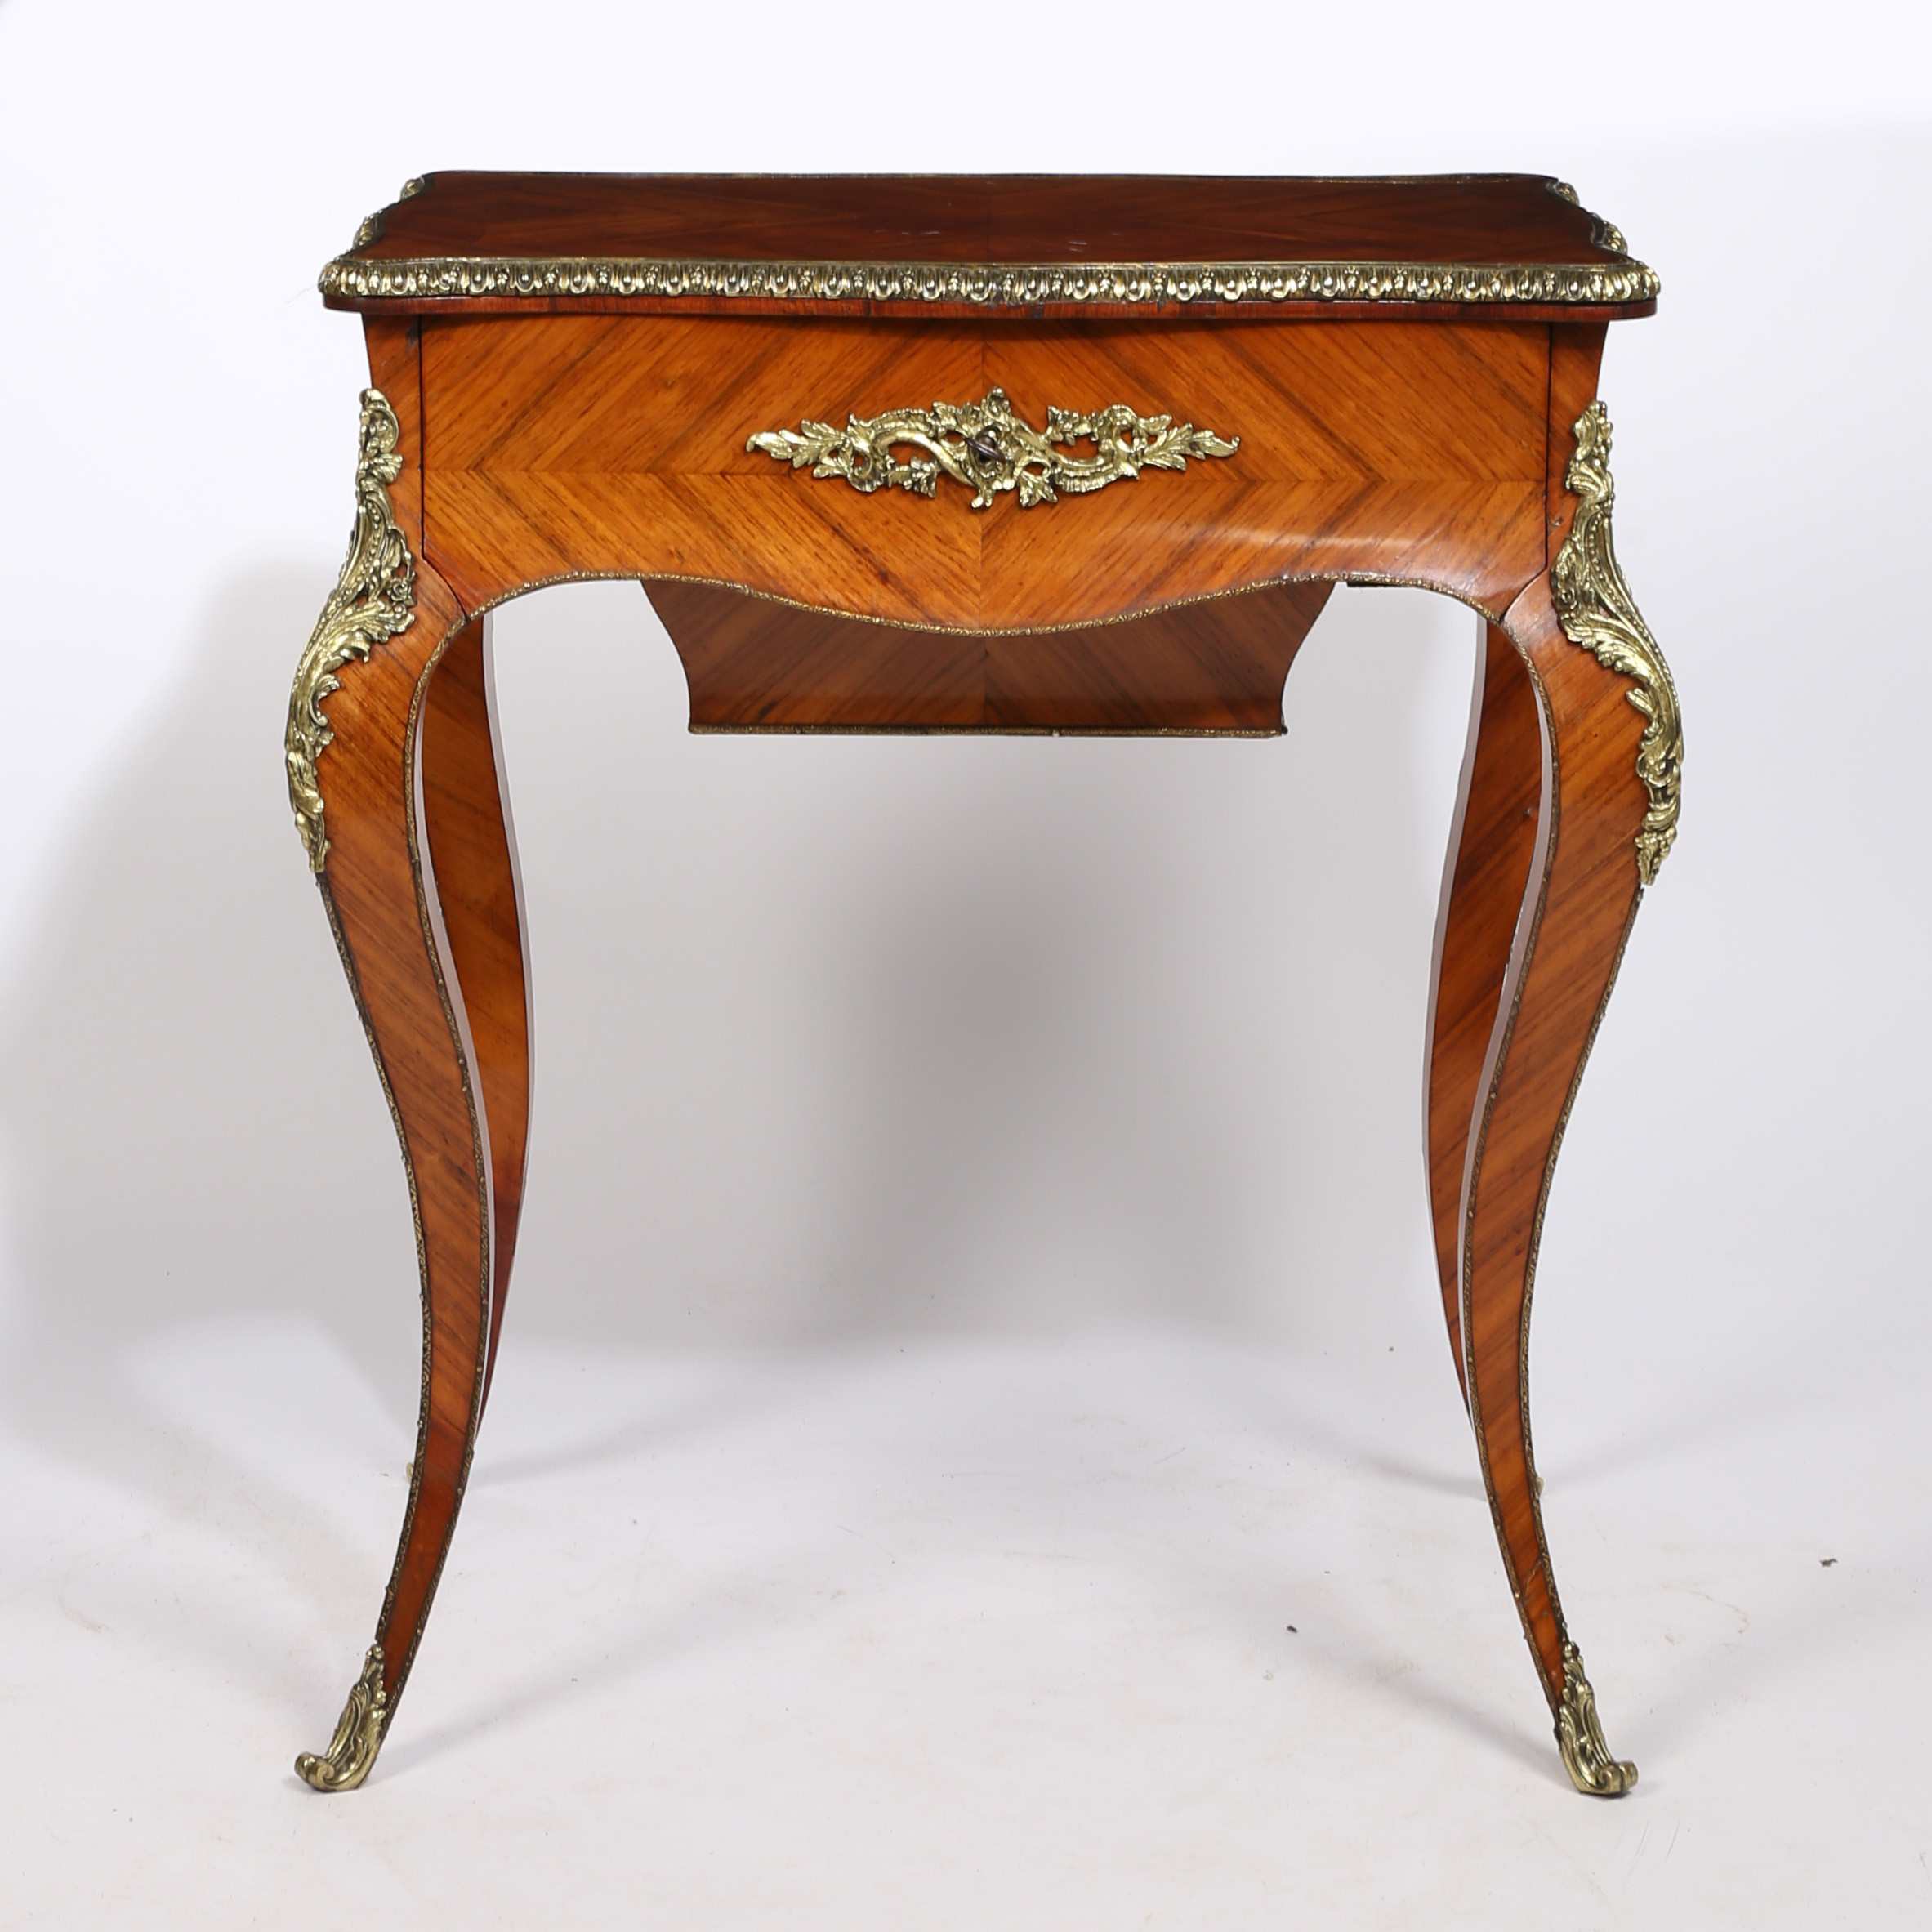 A 19TH CENTURY FRENCH KINGWOOD AND ORMOLU TABLE. - Image 2 of 13